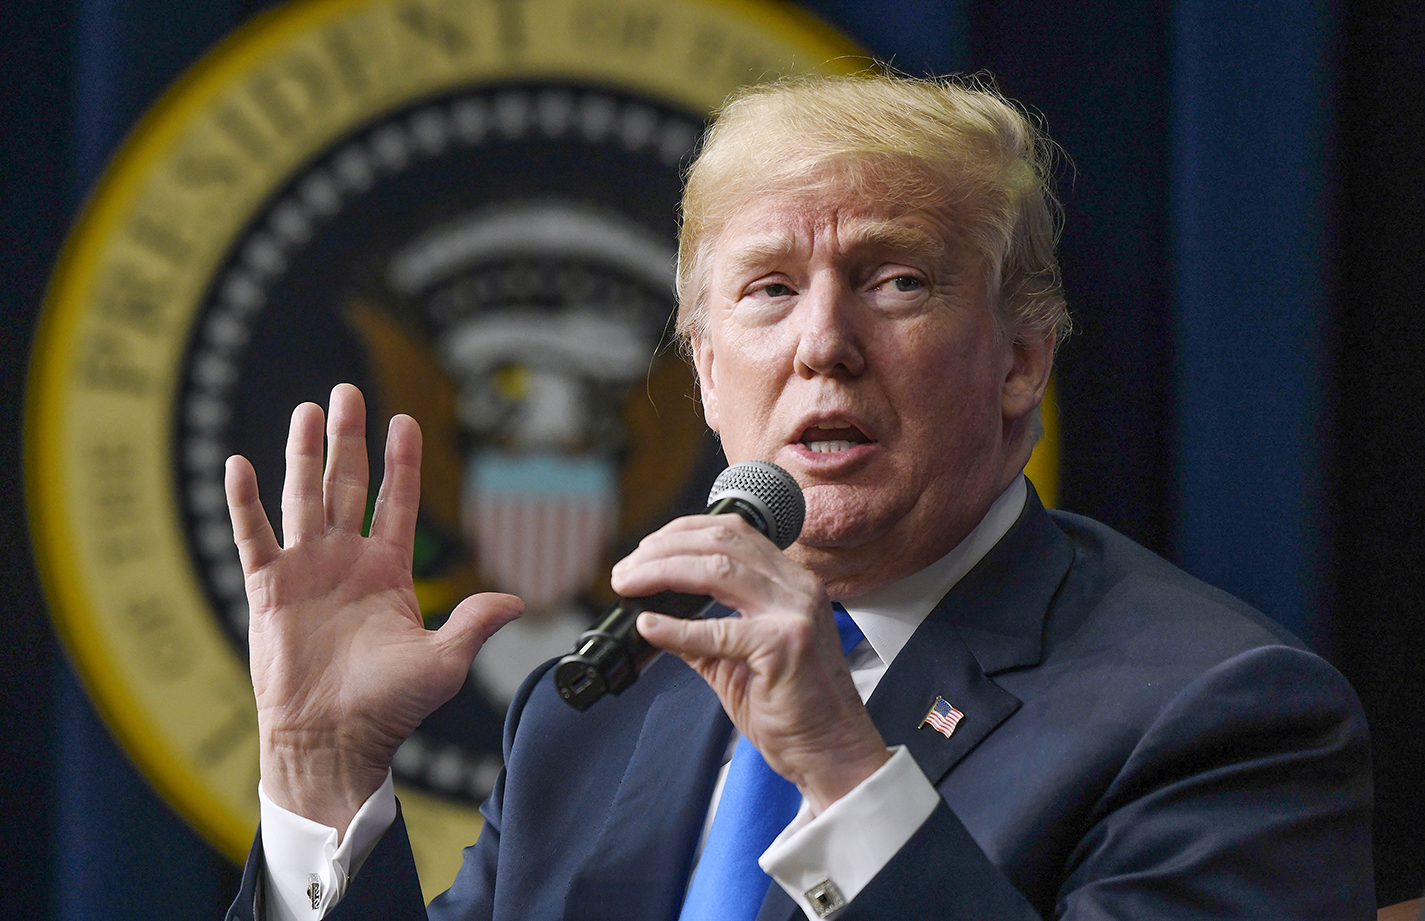 President Donald Trump speaks at a Washington, D.C. event March 22. At a Cleveland speech March 29, he said community colleges were synonymous with vocational schools.